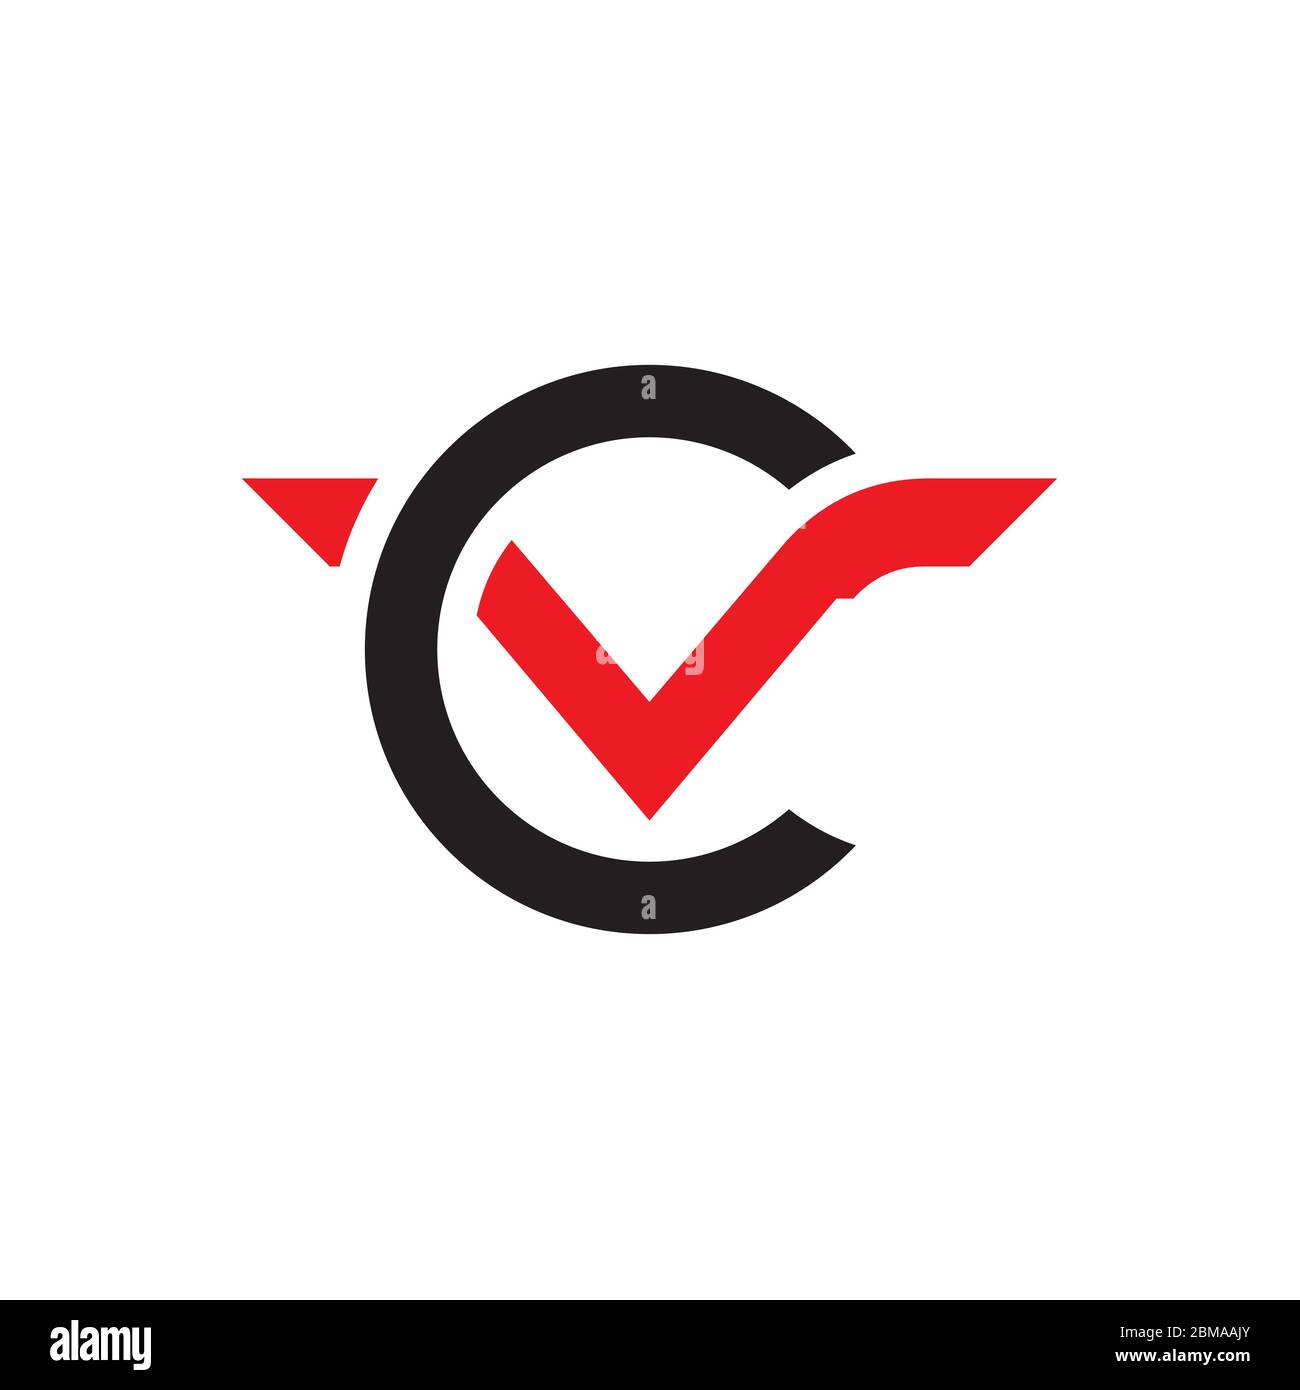 Letter v logo with a red circle swoosh design Vector Image